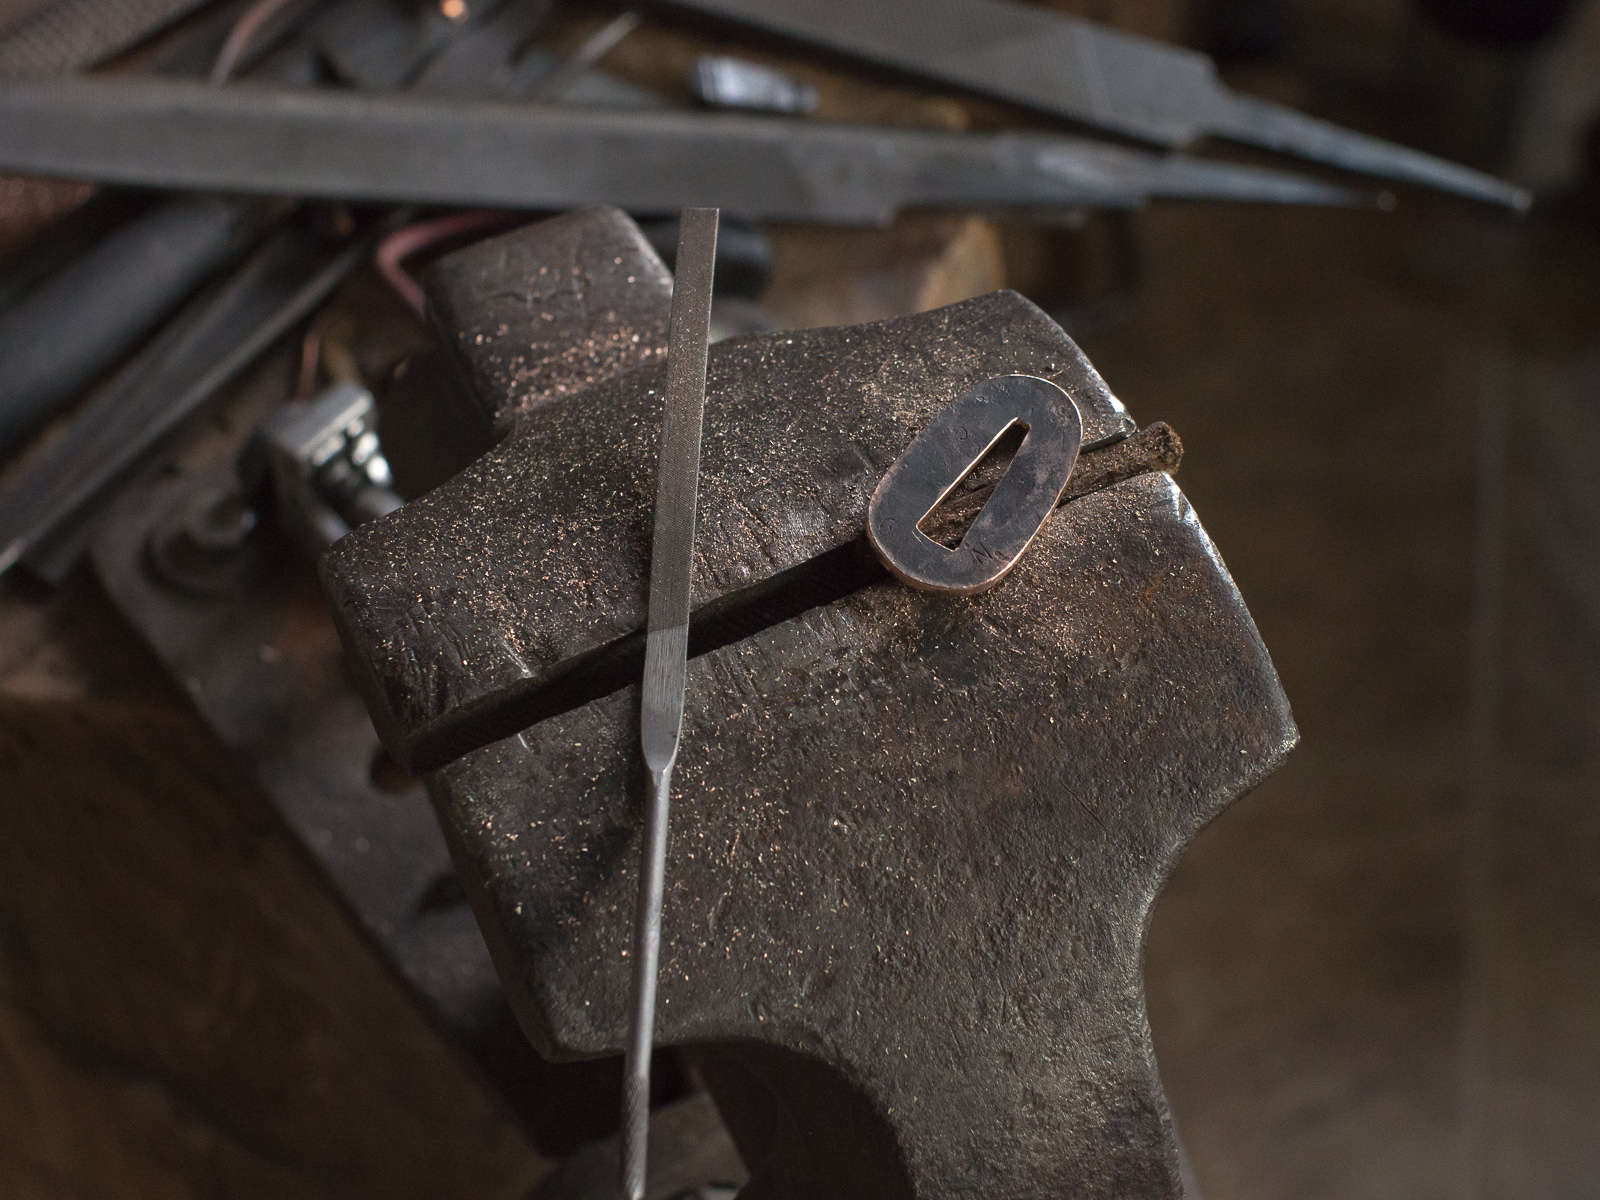 Island Blacksmith: Charcoal forged knives reclaimed from files.